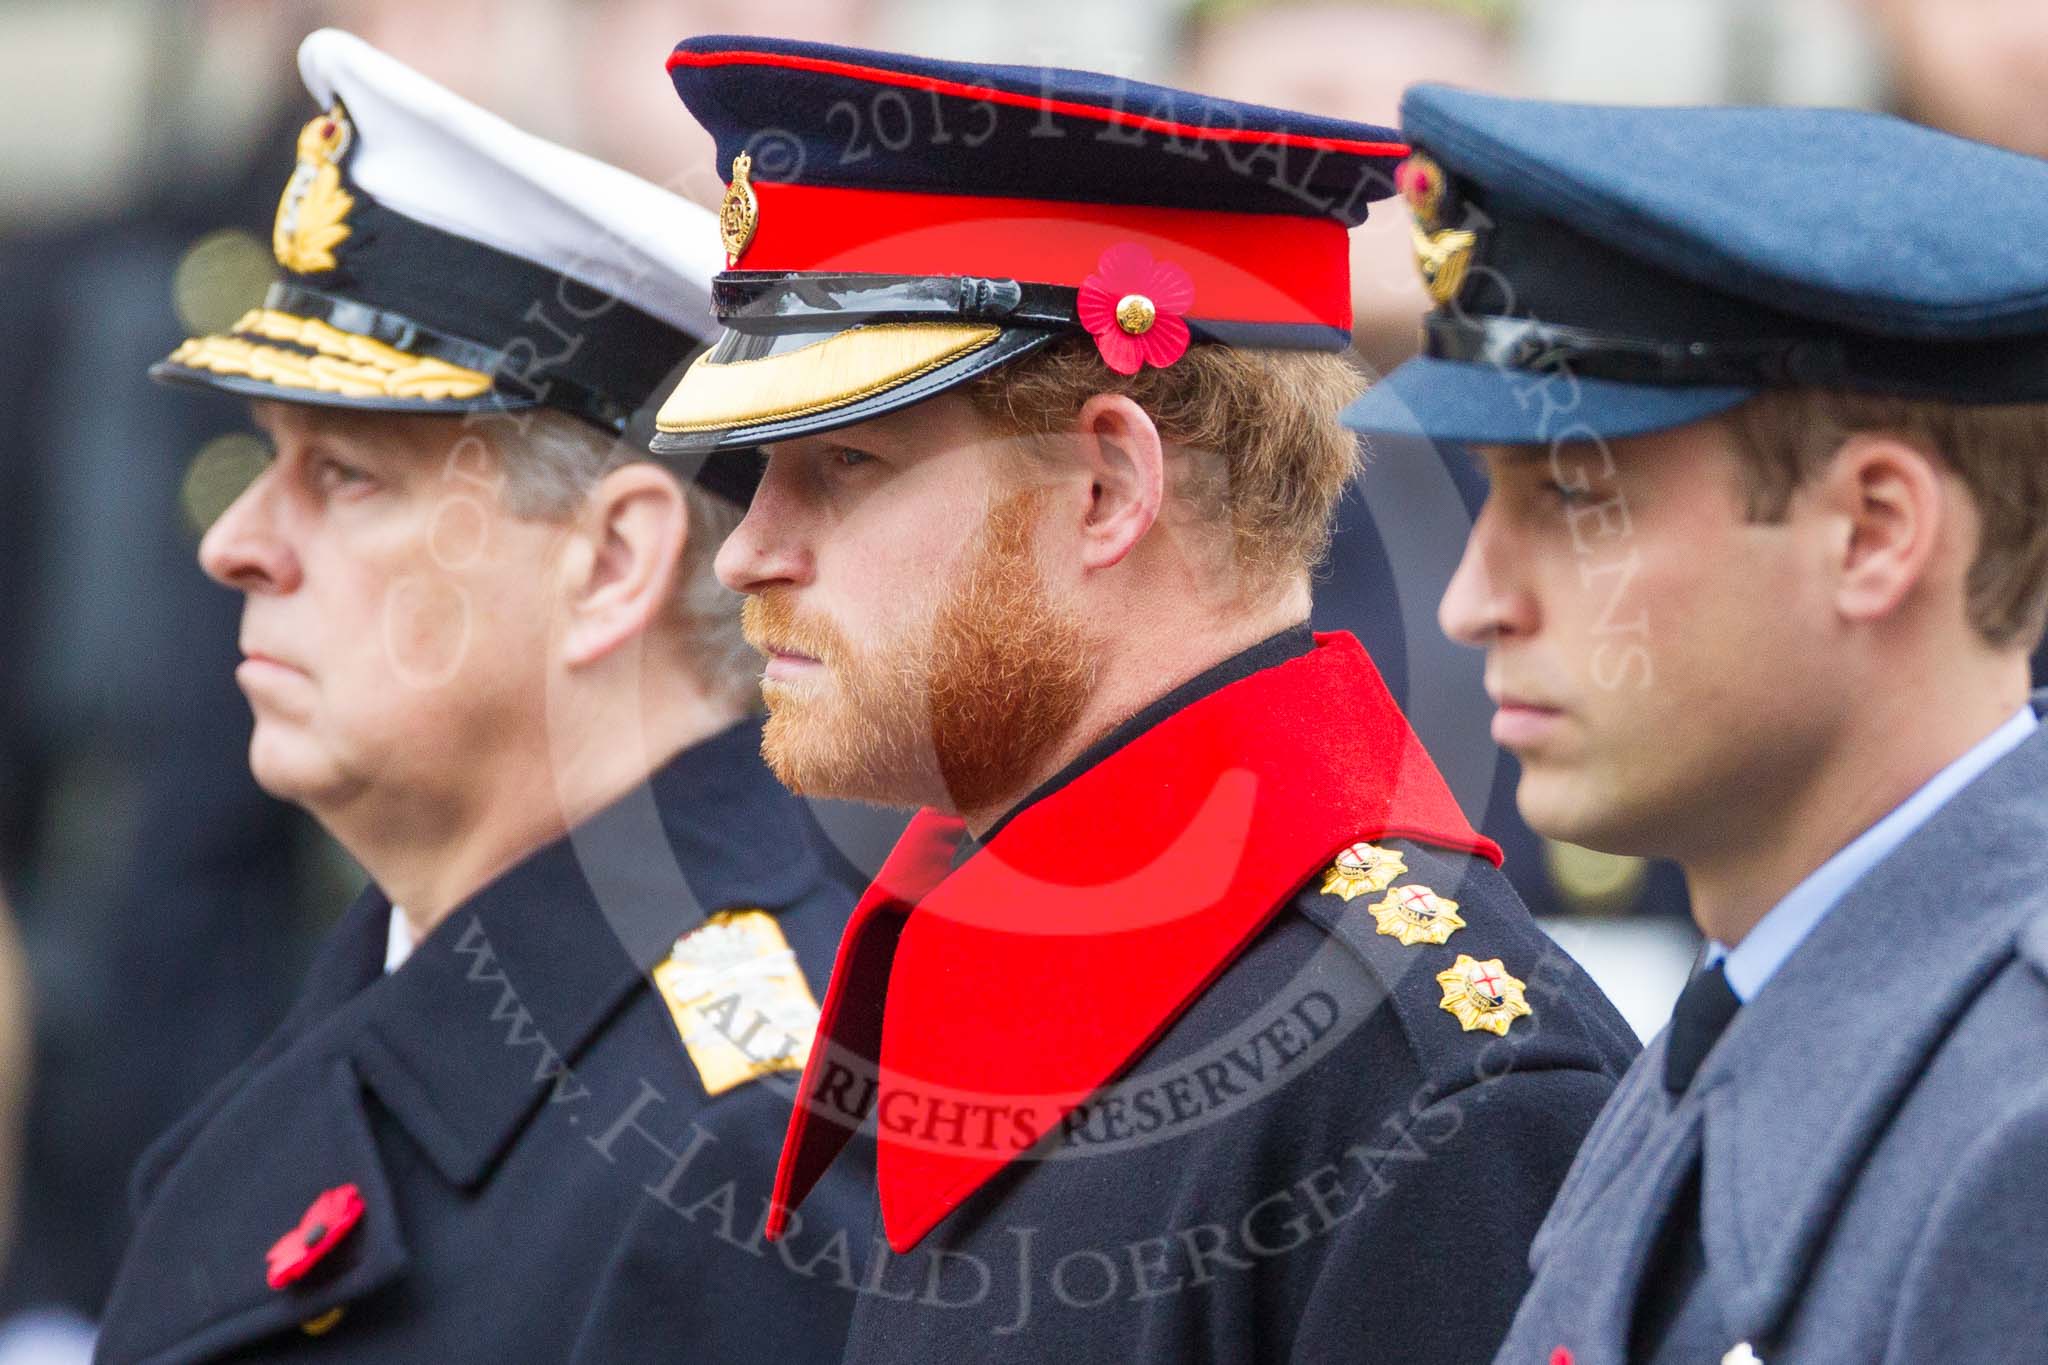 Remembrance Sunday at the Cenotaph 2015: HRH Prince Henry of Wales during the Cenotaph ceremony 2015. Prince Harry is wearing the uniform of  a Captain in the Blues and Royals Household Cavelry Regiment.
To his left is Prince William, to his right the Duke of York. Image #148, 08 November 2015 11:02 Whitehall, London, UK